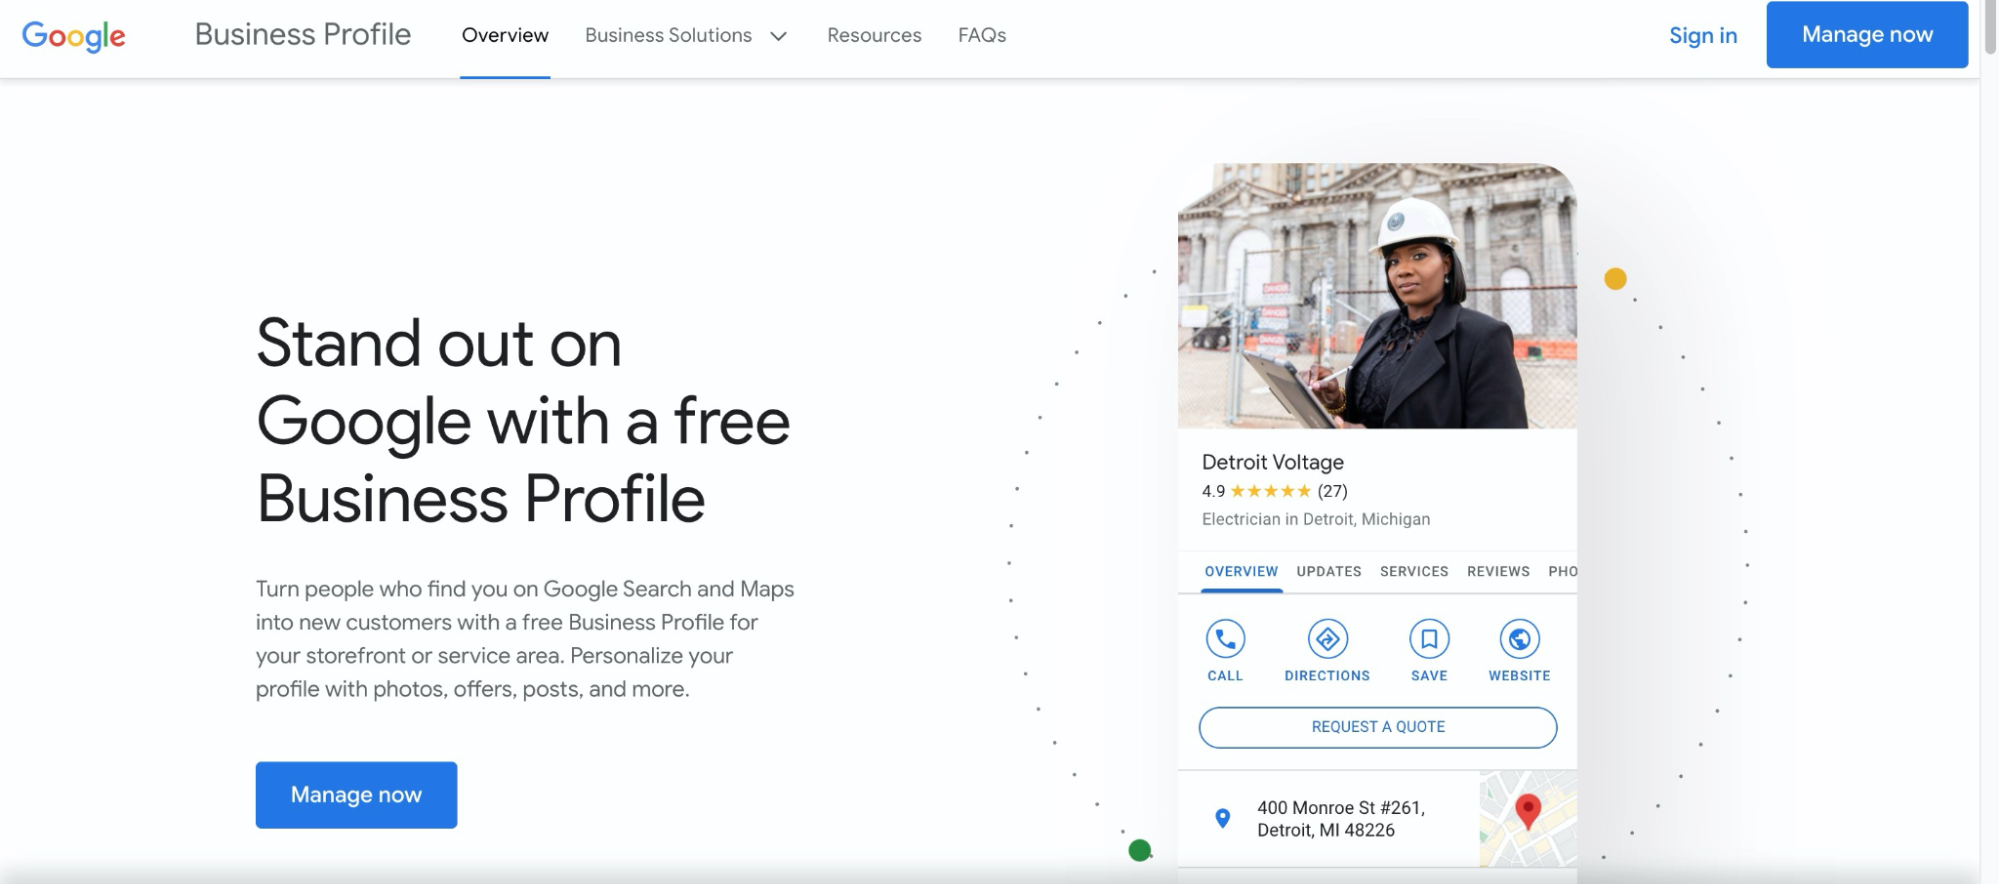 Google Business profile sign up page with image of a listing on the right